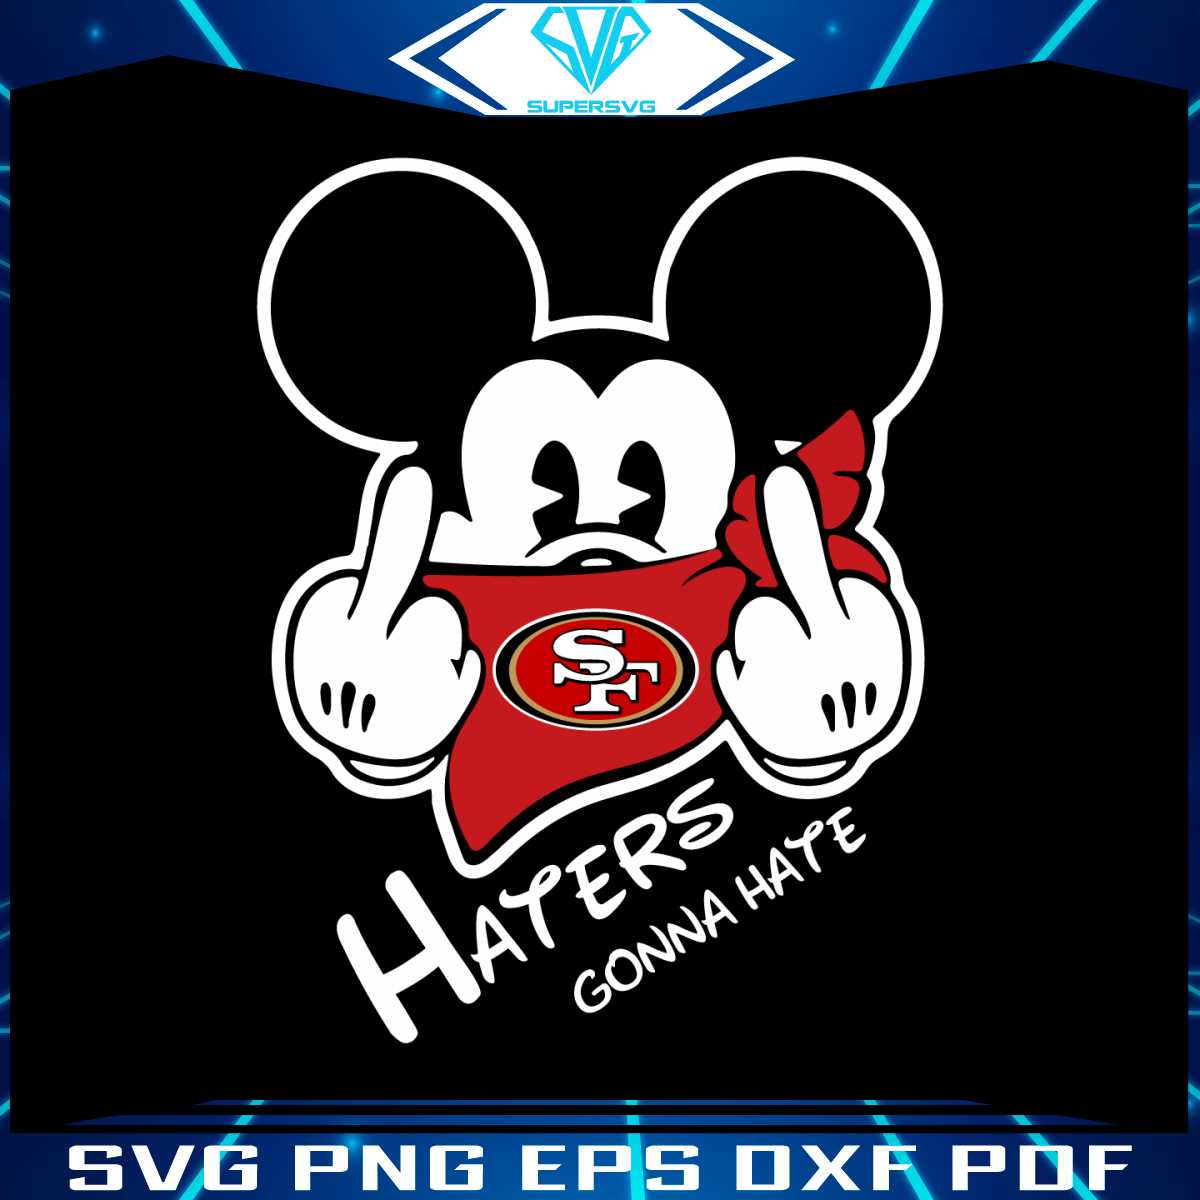 haters-gonna-hate-49ers-mickey-svg